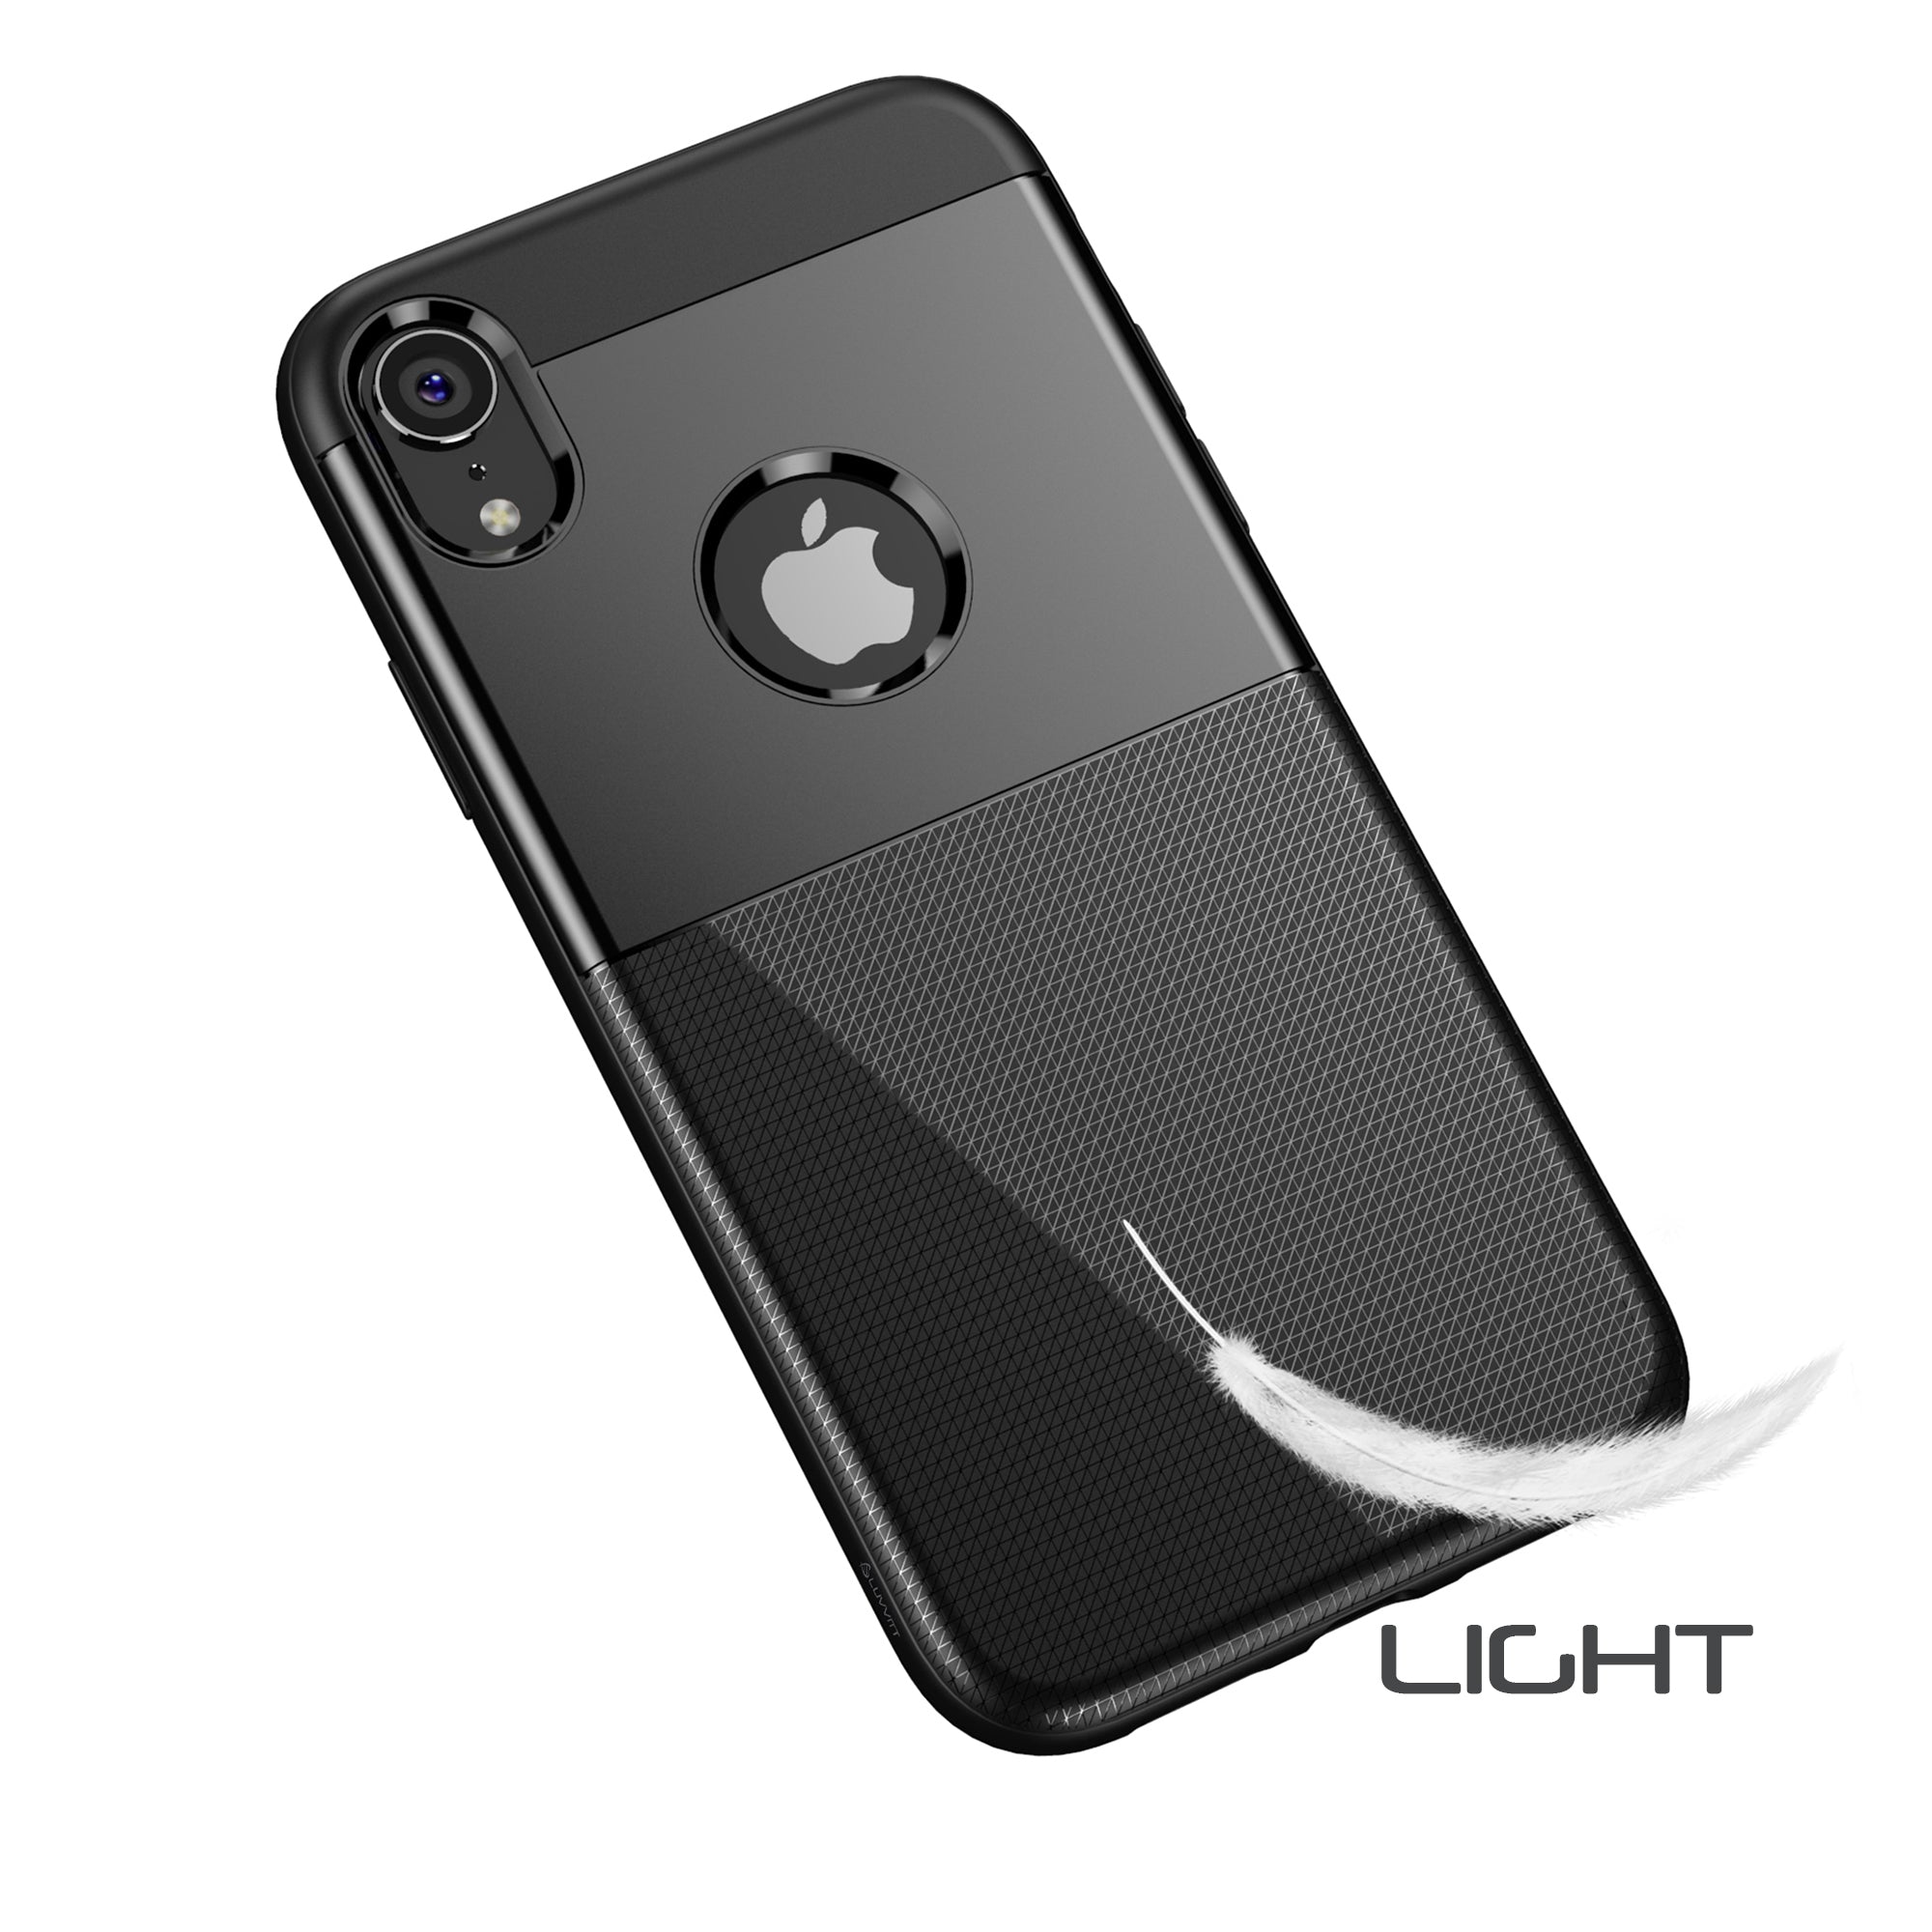 Luvvitt Sleek Armor Case for iPhone XR with 6.1 inch Screen 2018 - Black